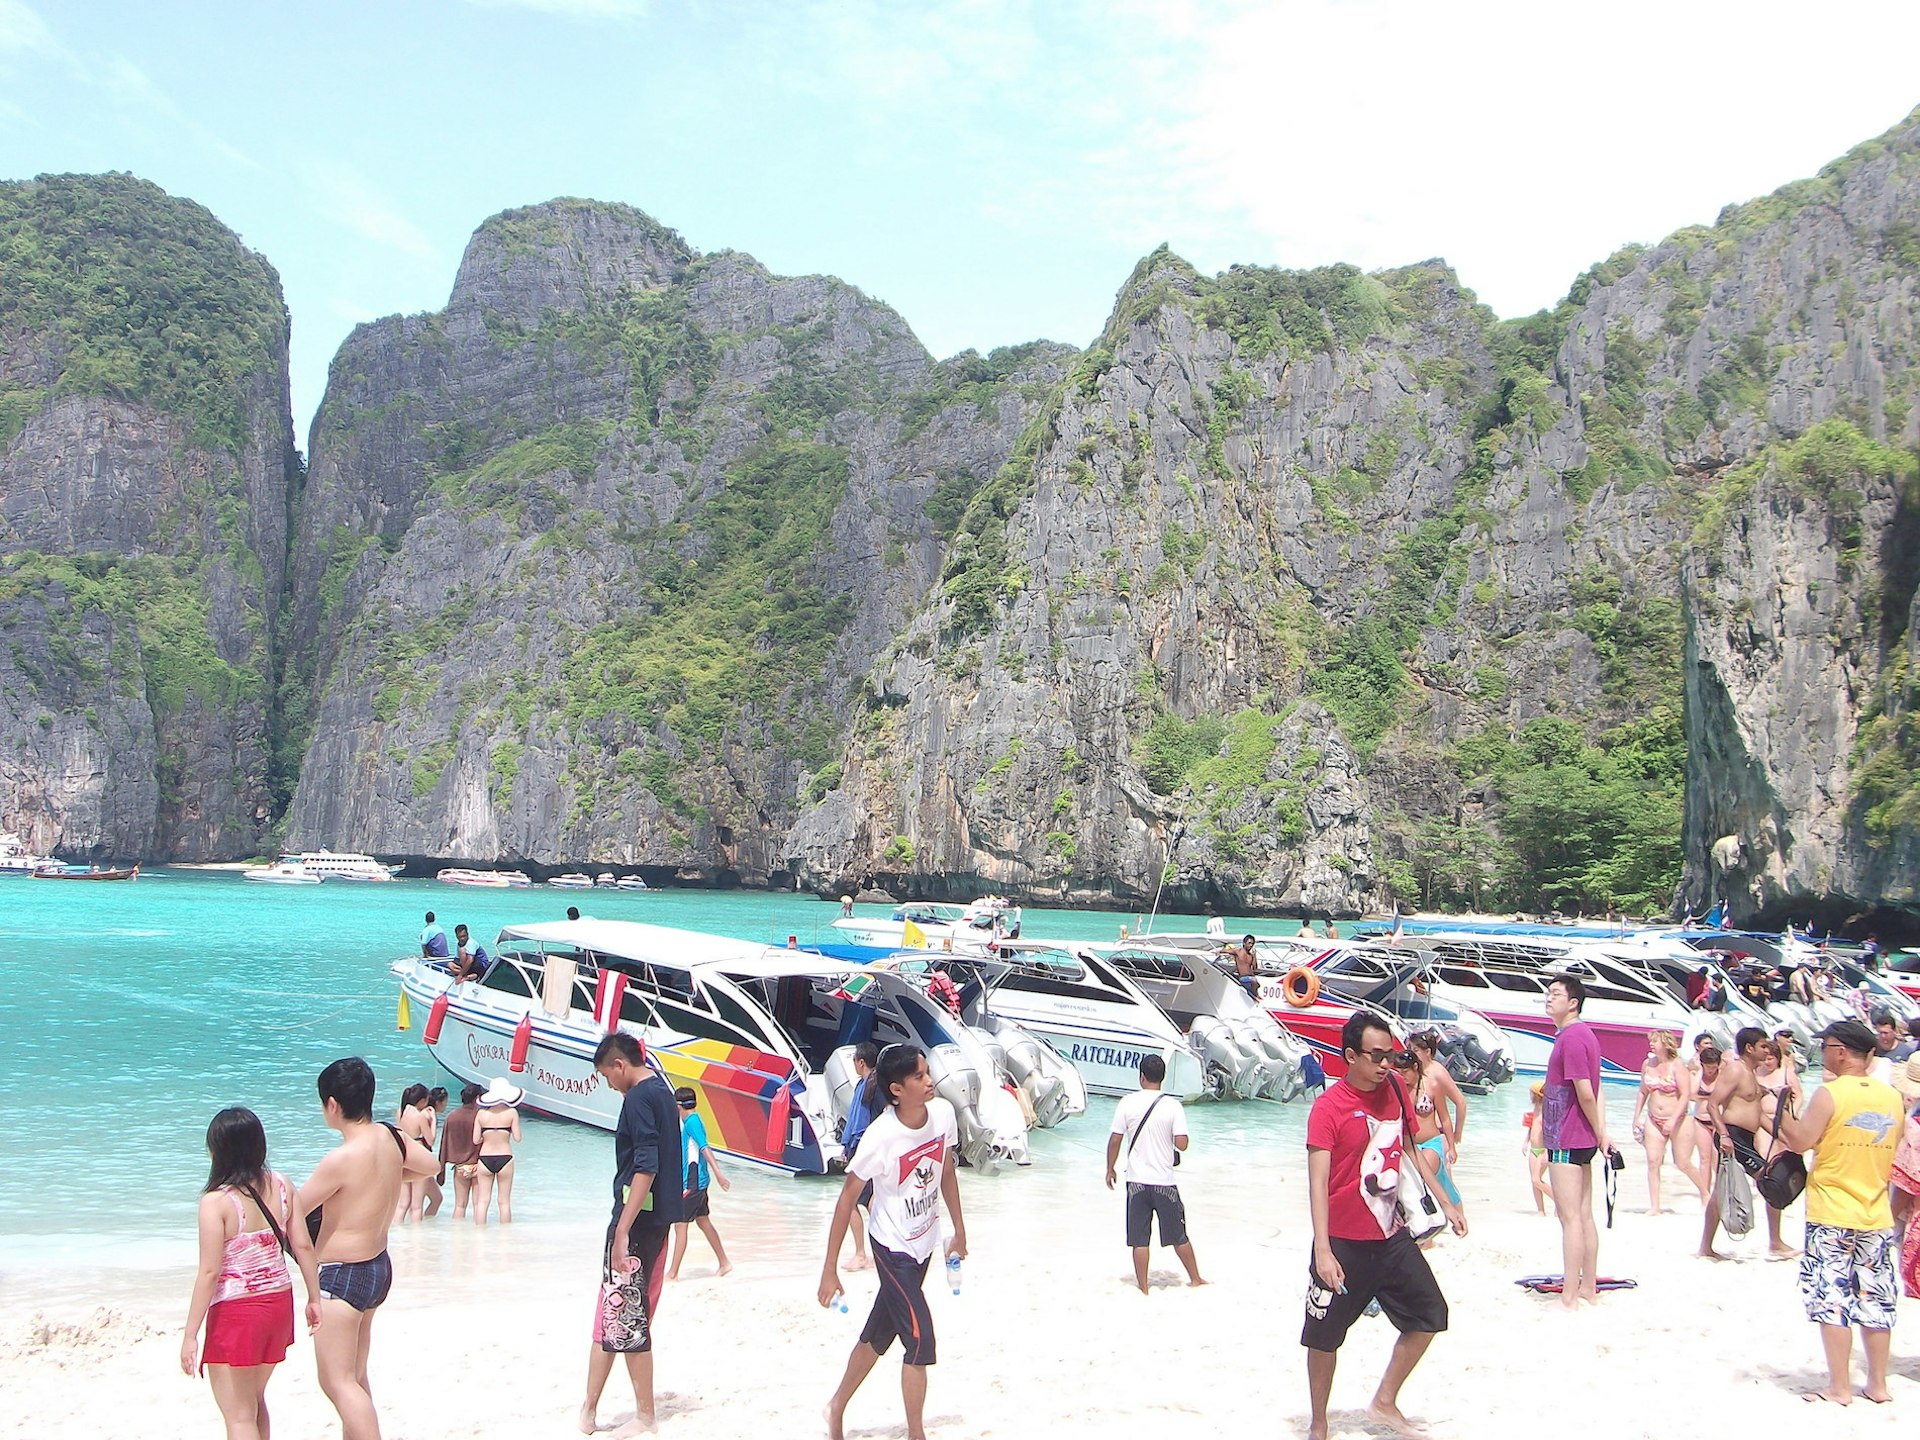 A beautiful cove is filled with speedboats and tourists in Thailand